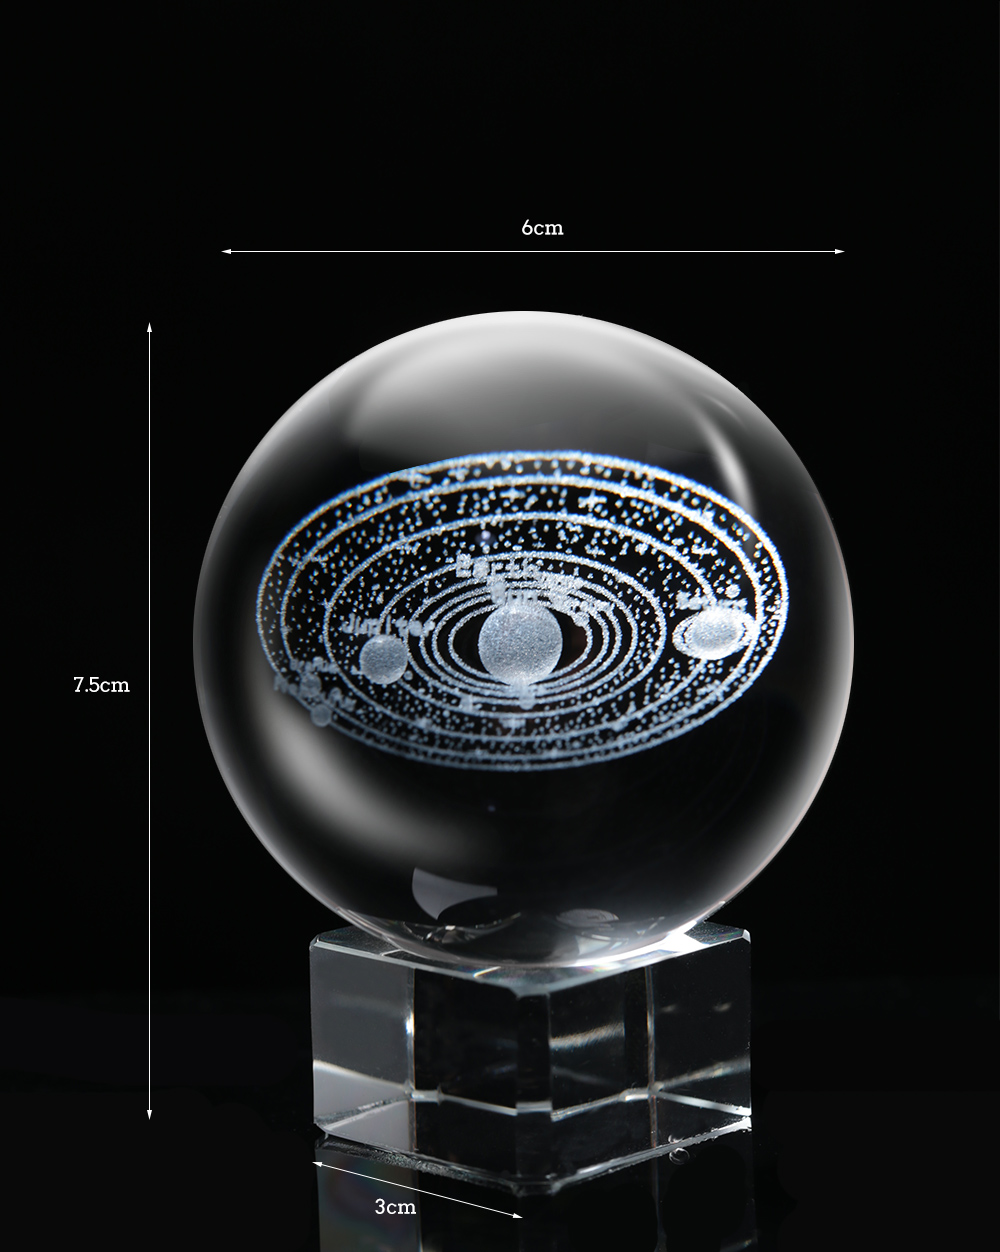 Laser Engraved Solar System Crystal Ball 3D Miniature Planets Model